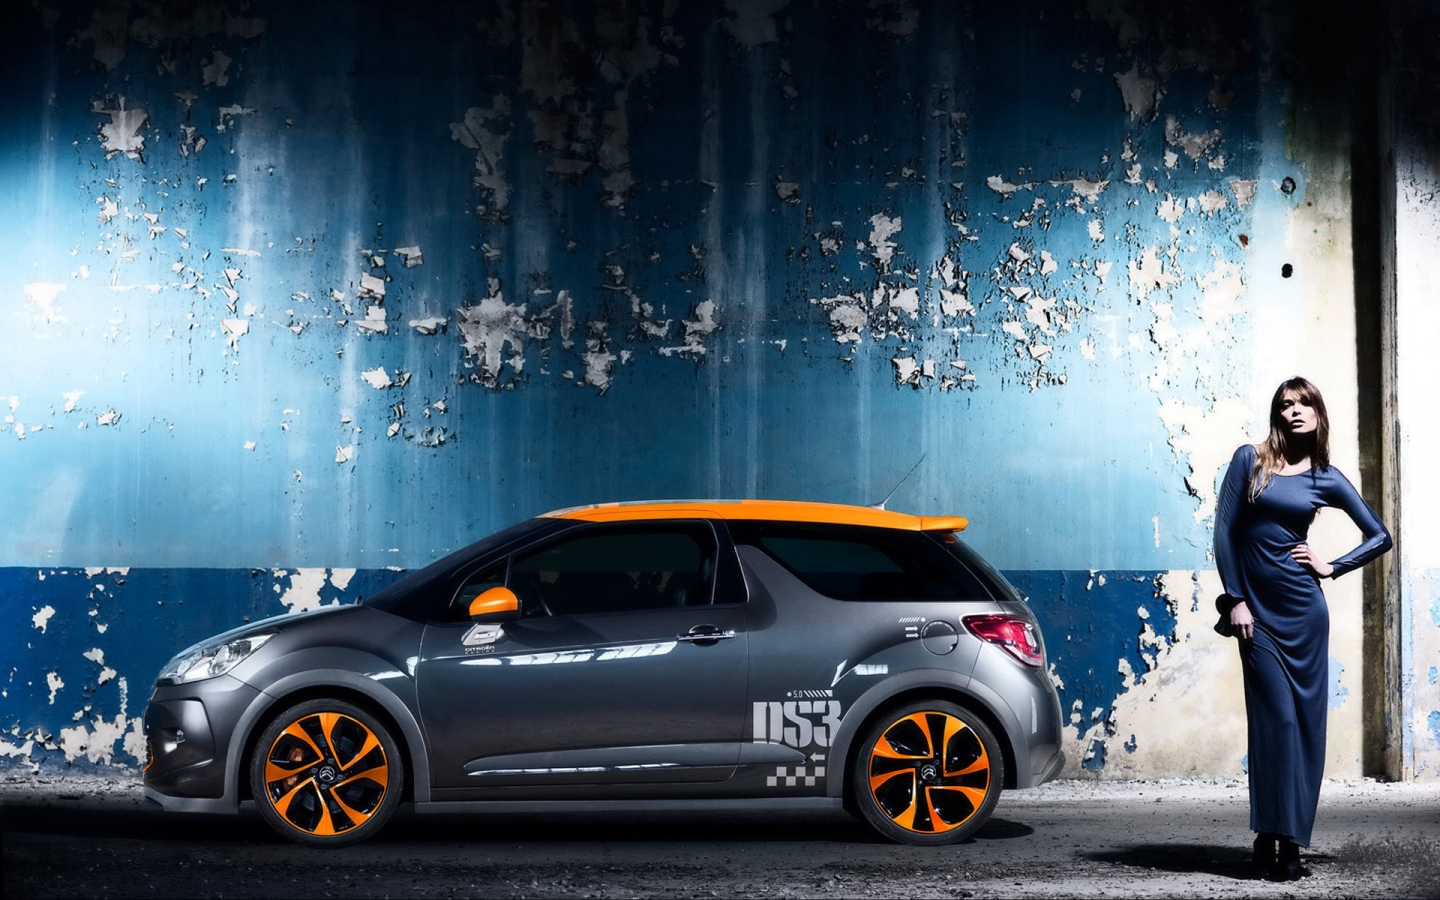 Cool Citroen DS3 Side Angle for 1440 x 900 widescreen resolution